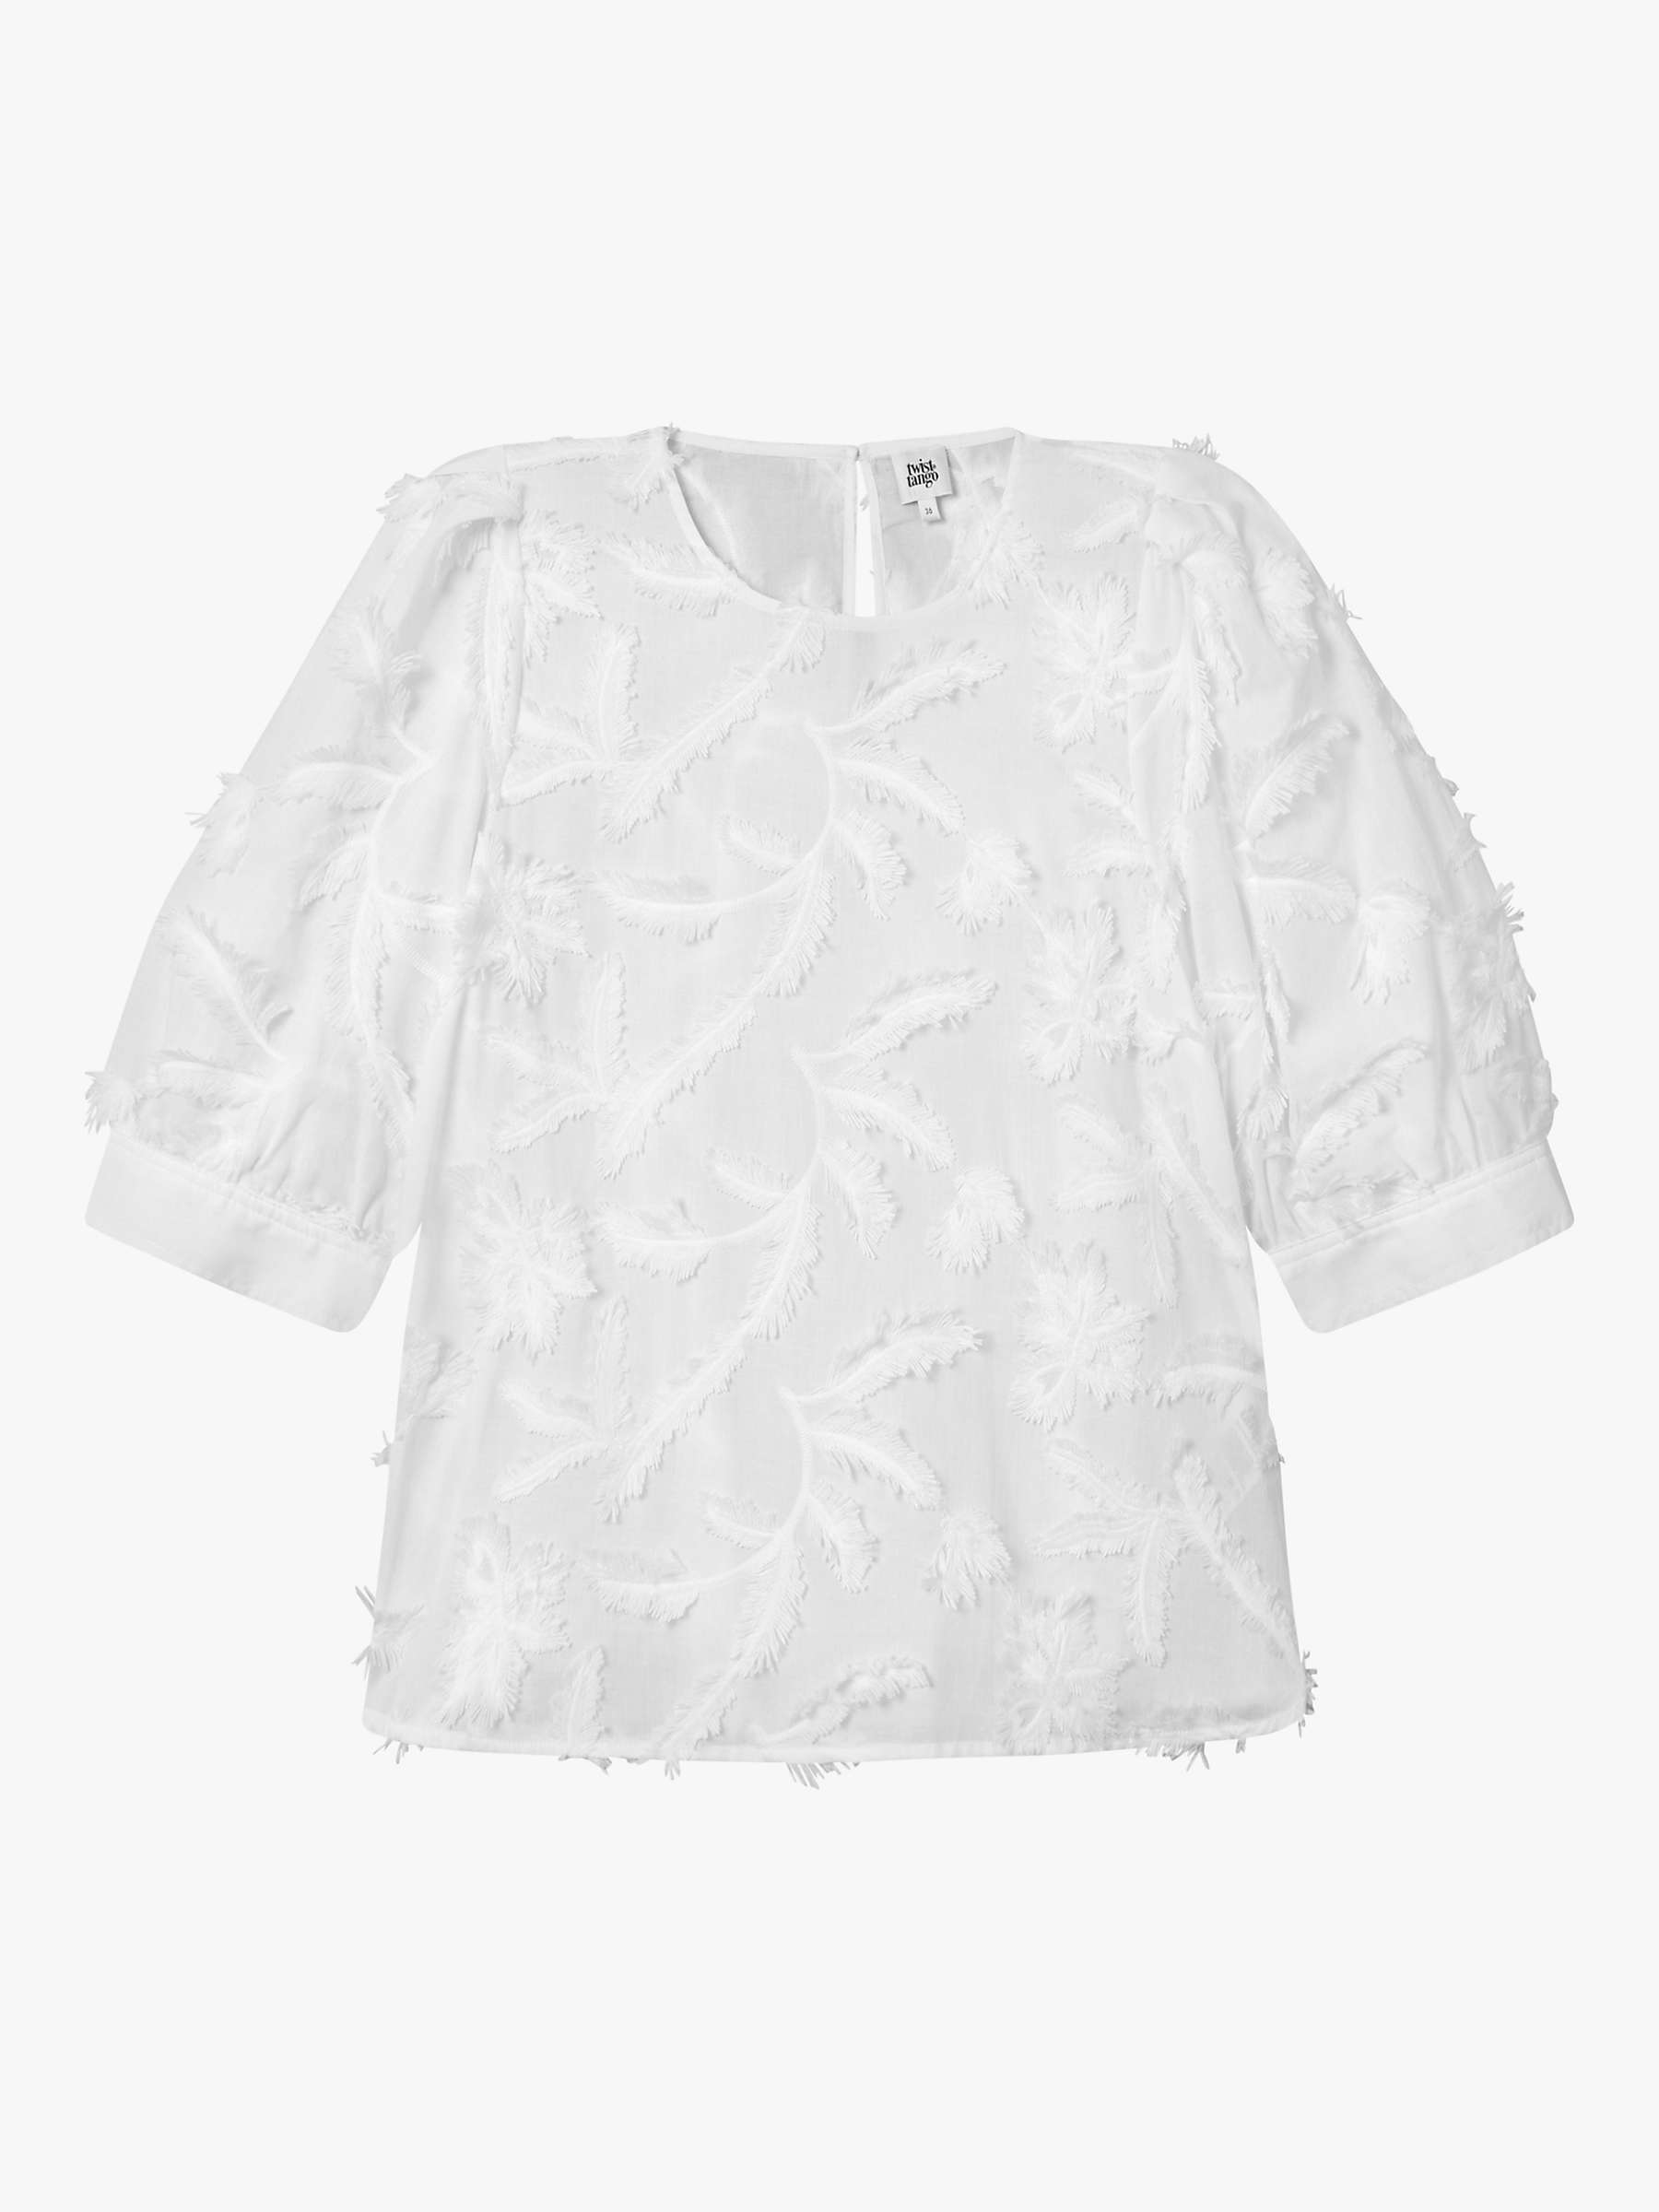 Buy Twist & Tango Marla Embroided Blouse Online at johnlewis.com